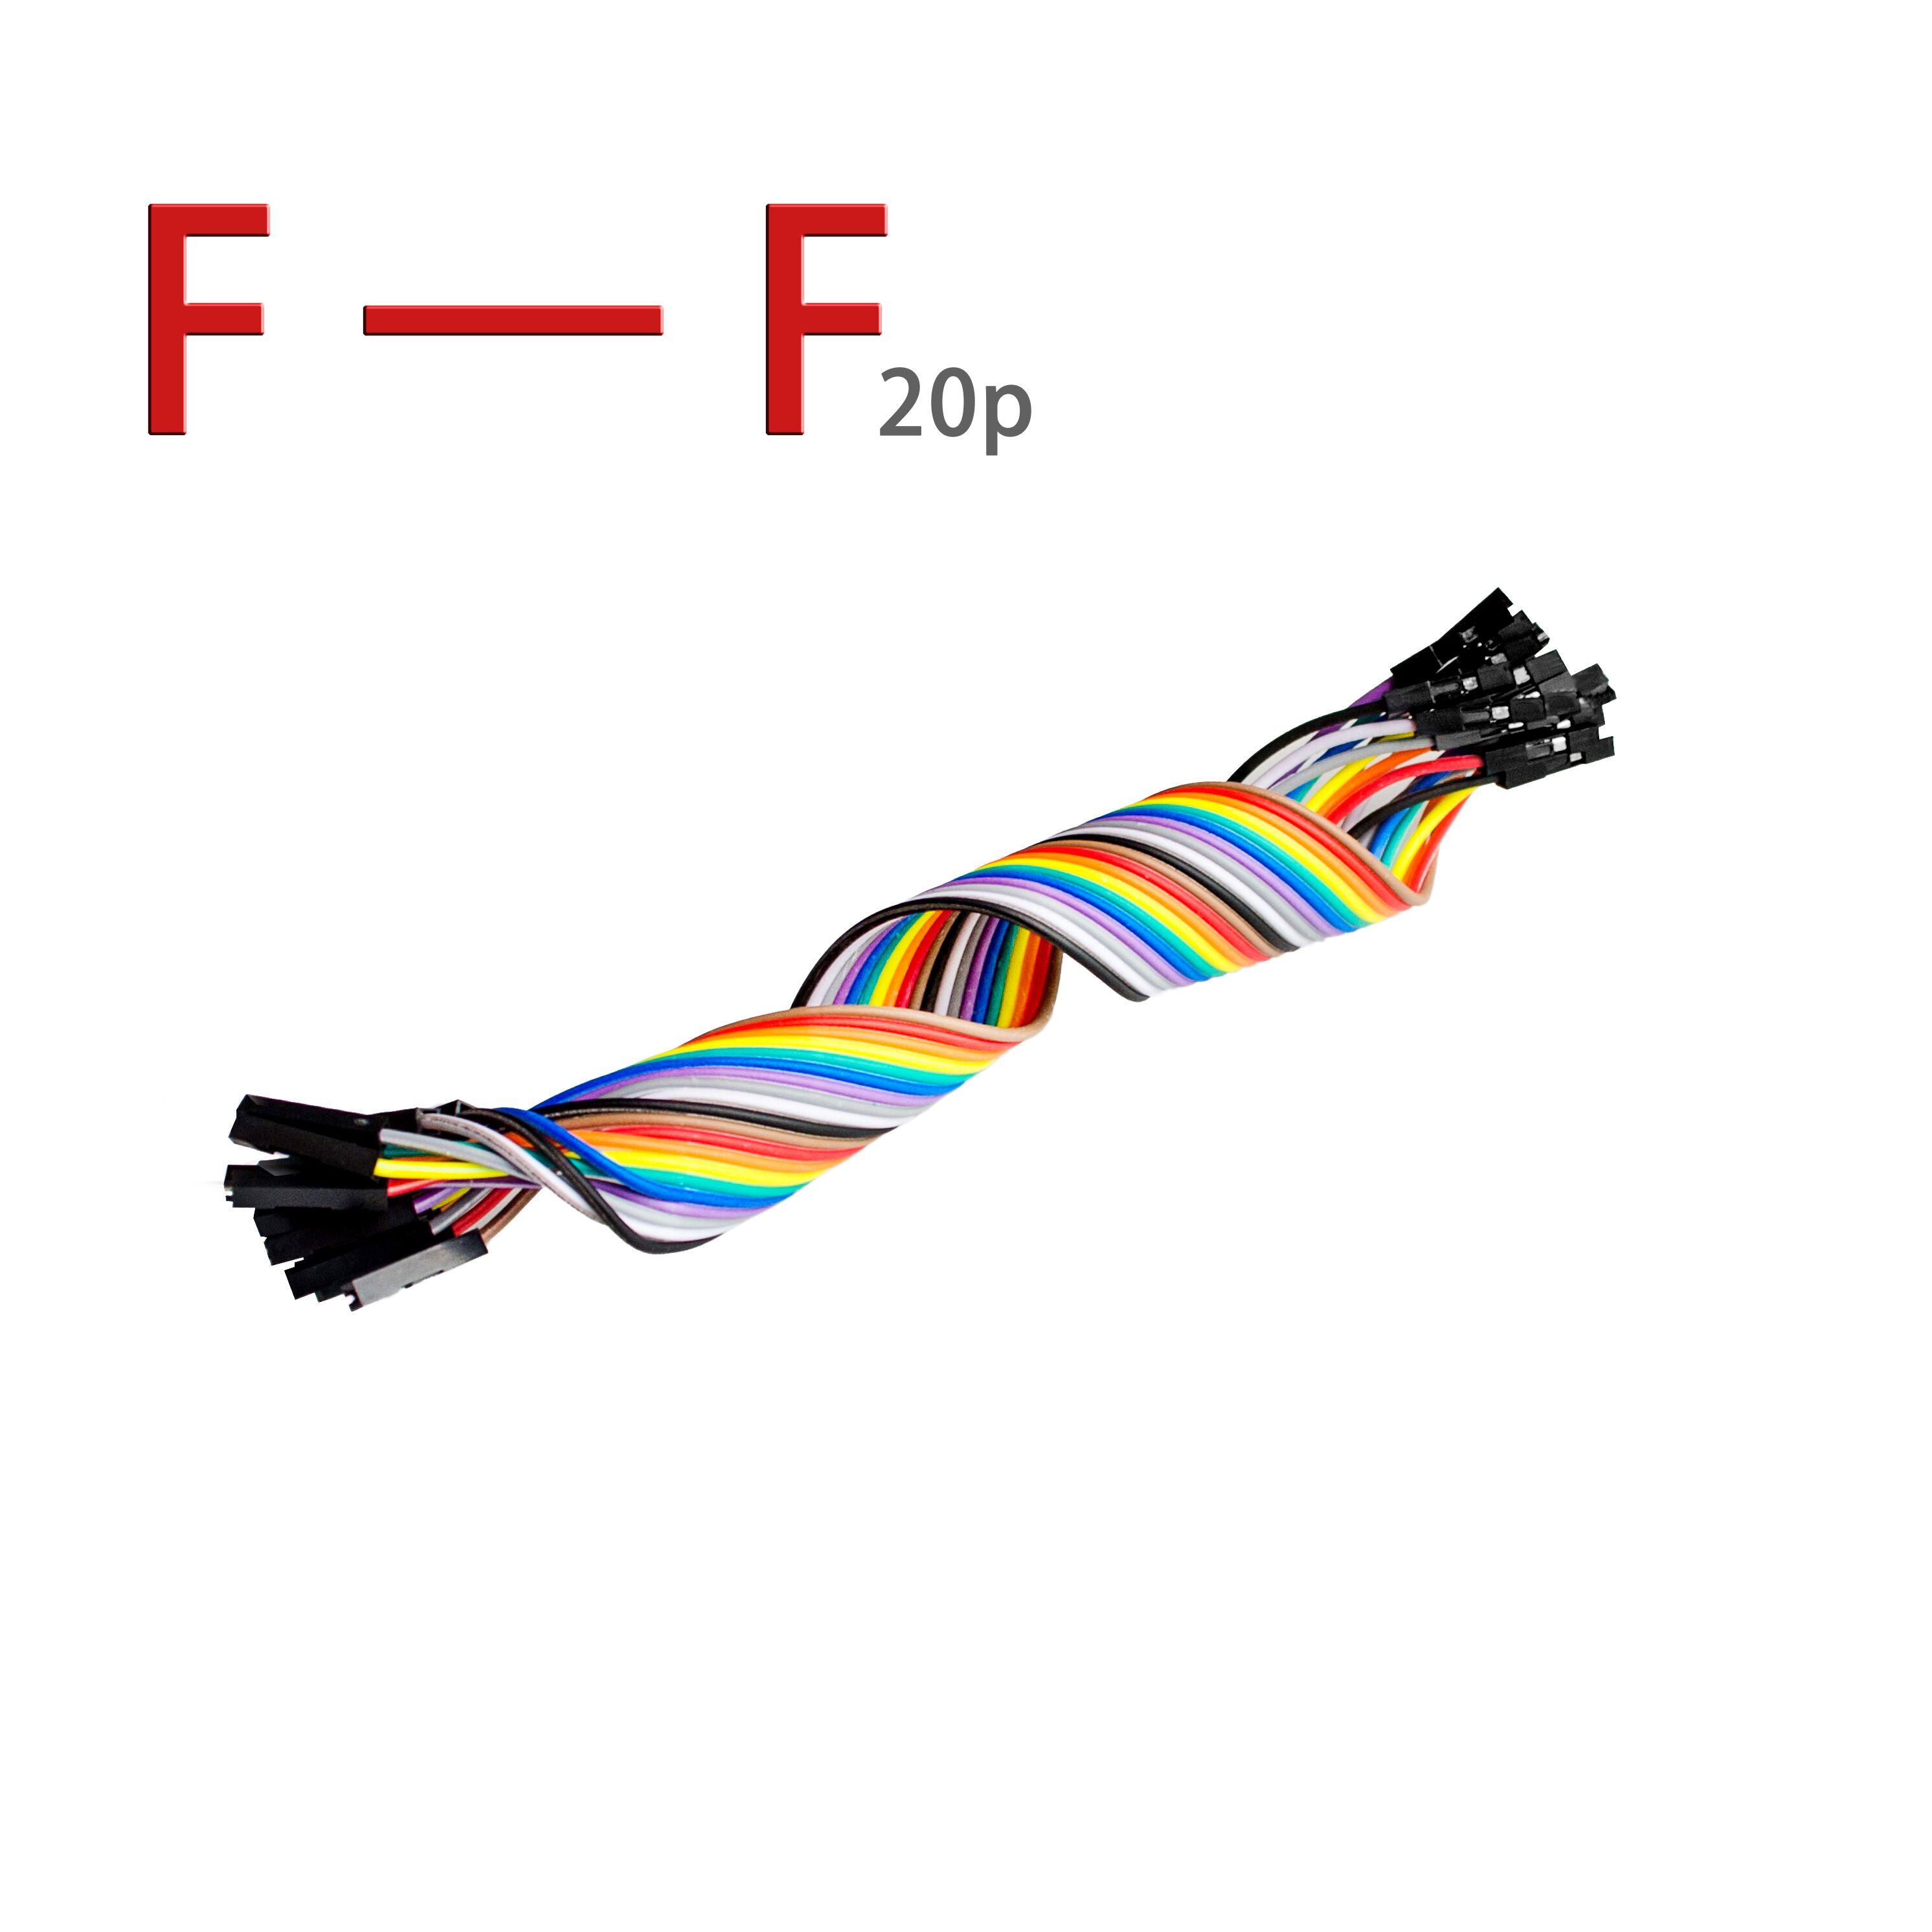 20pcs 20cm 2.54mm 1p-1p Pin Female to Female Color Breadboard Cable Jump Wire Jumper For